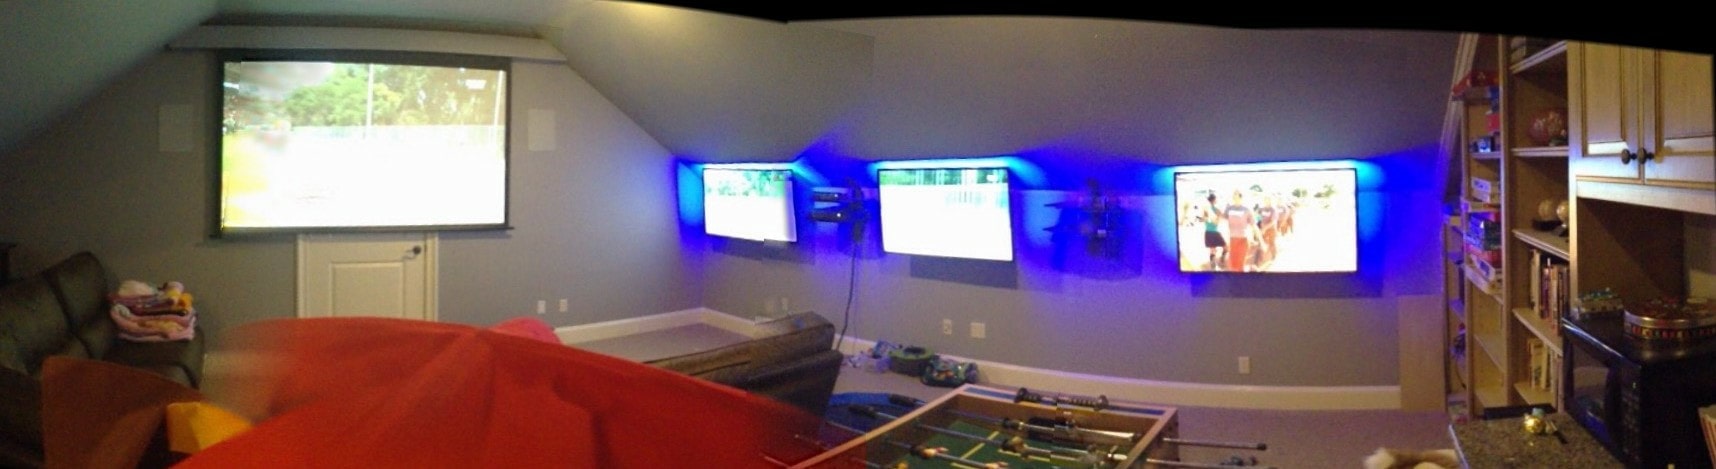 Logan Home Theater & Automation - Houston, TX, US, wall shelves